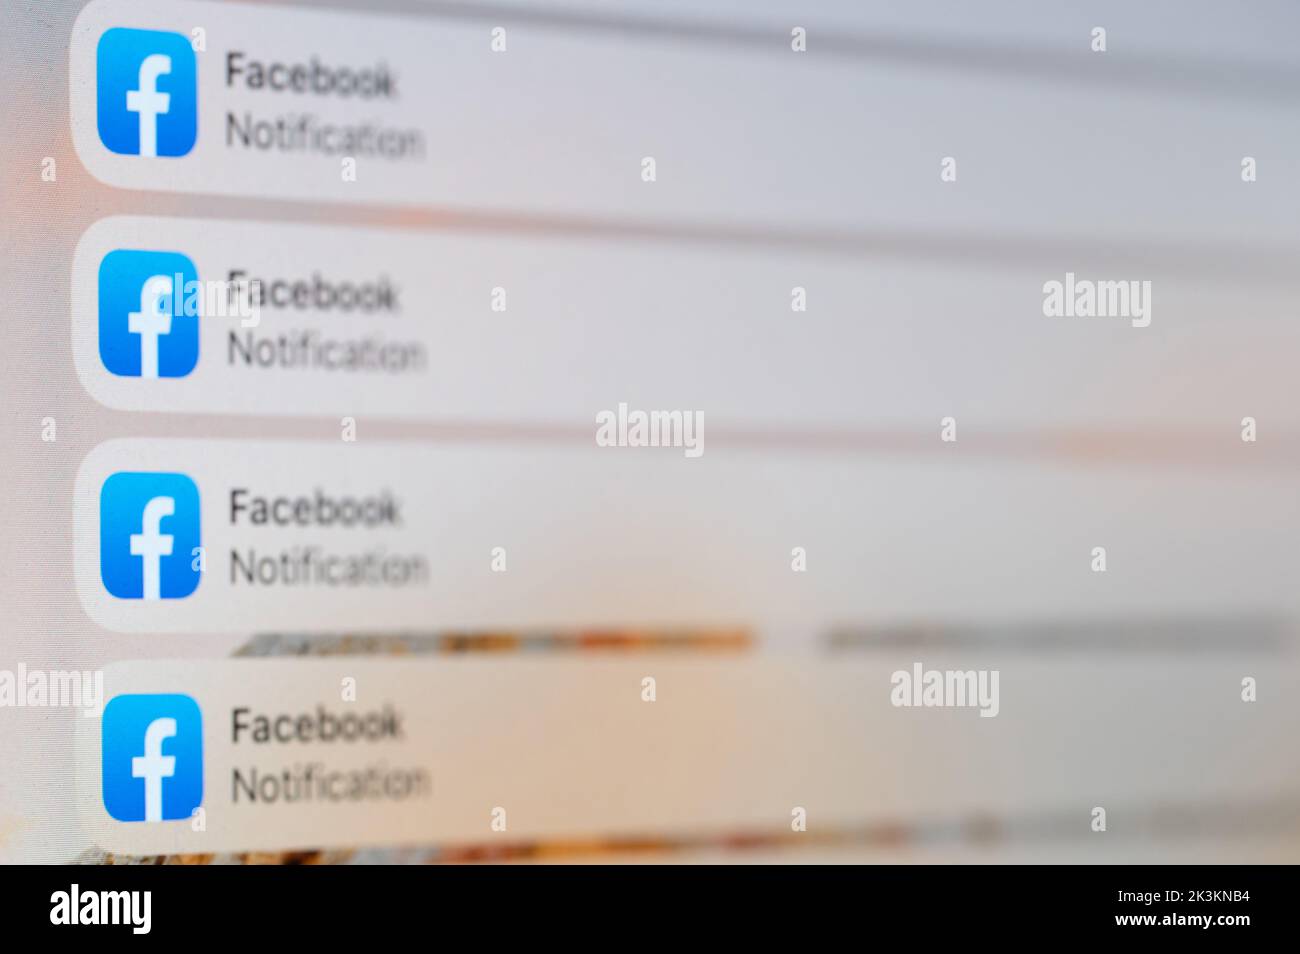 New york, USA - september 19, 2022: Spam notification on facebook on screen macro close up view background Stock Photo